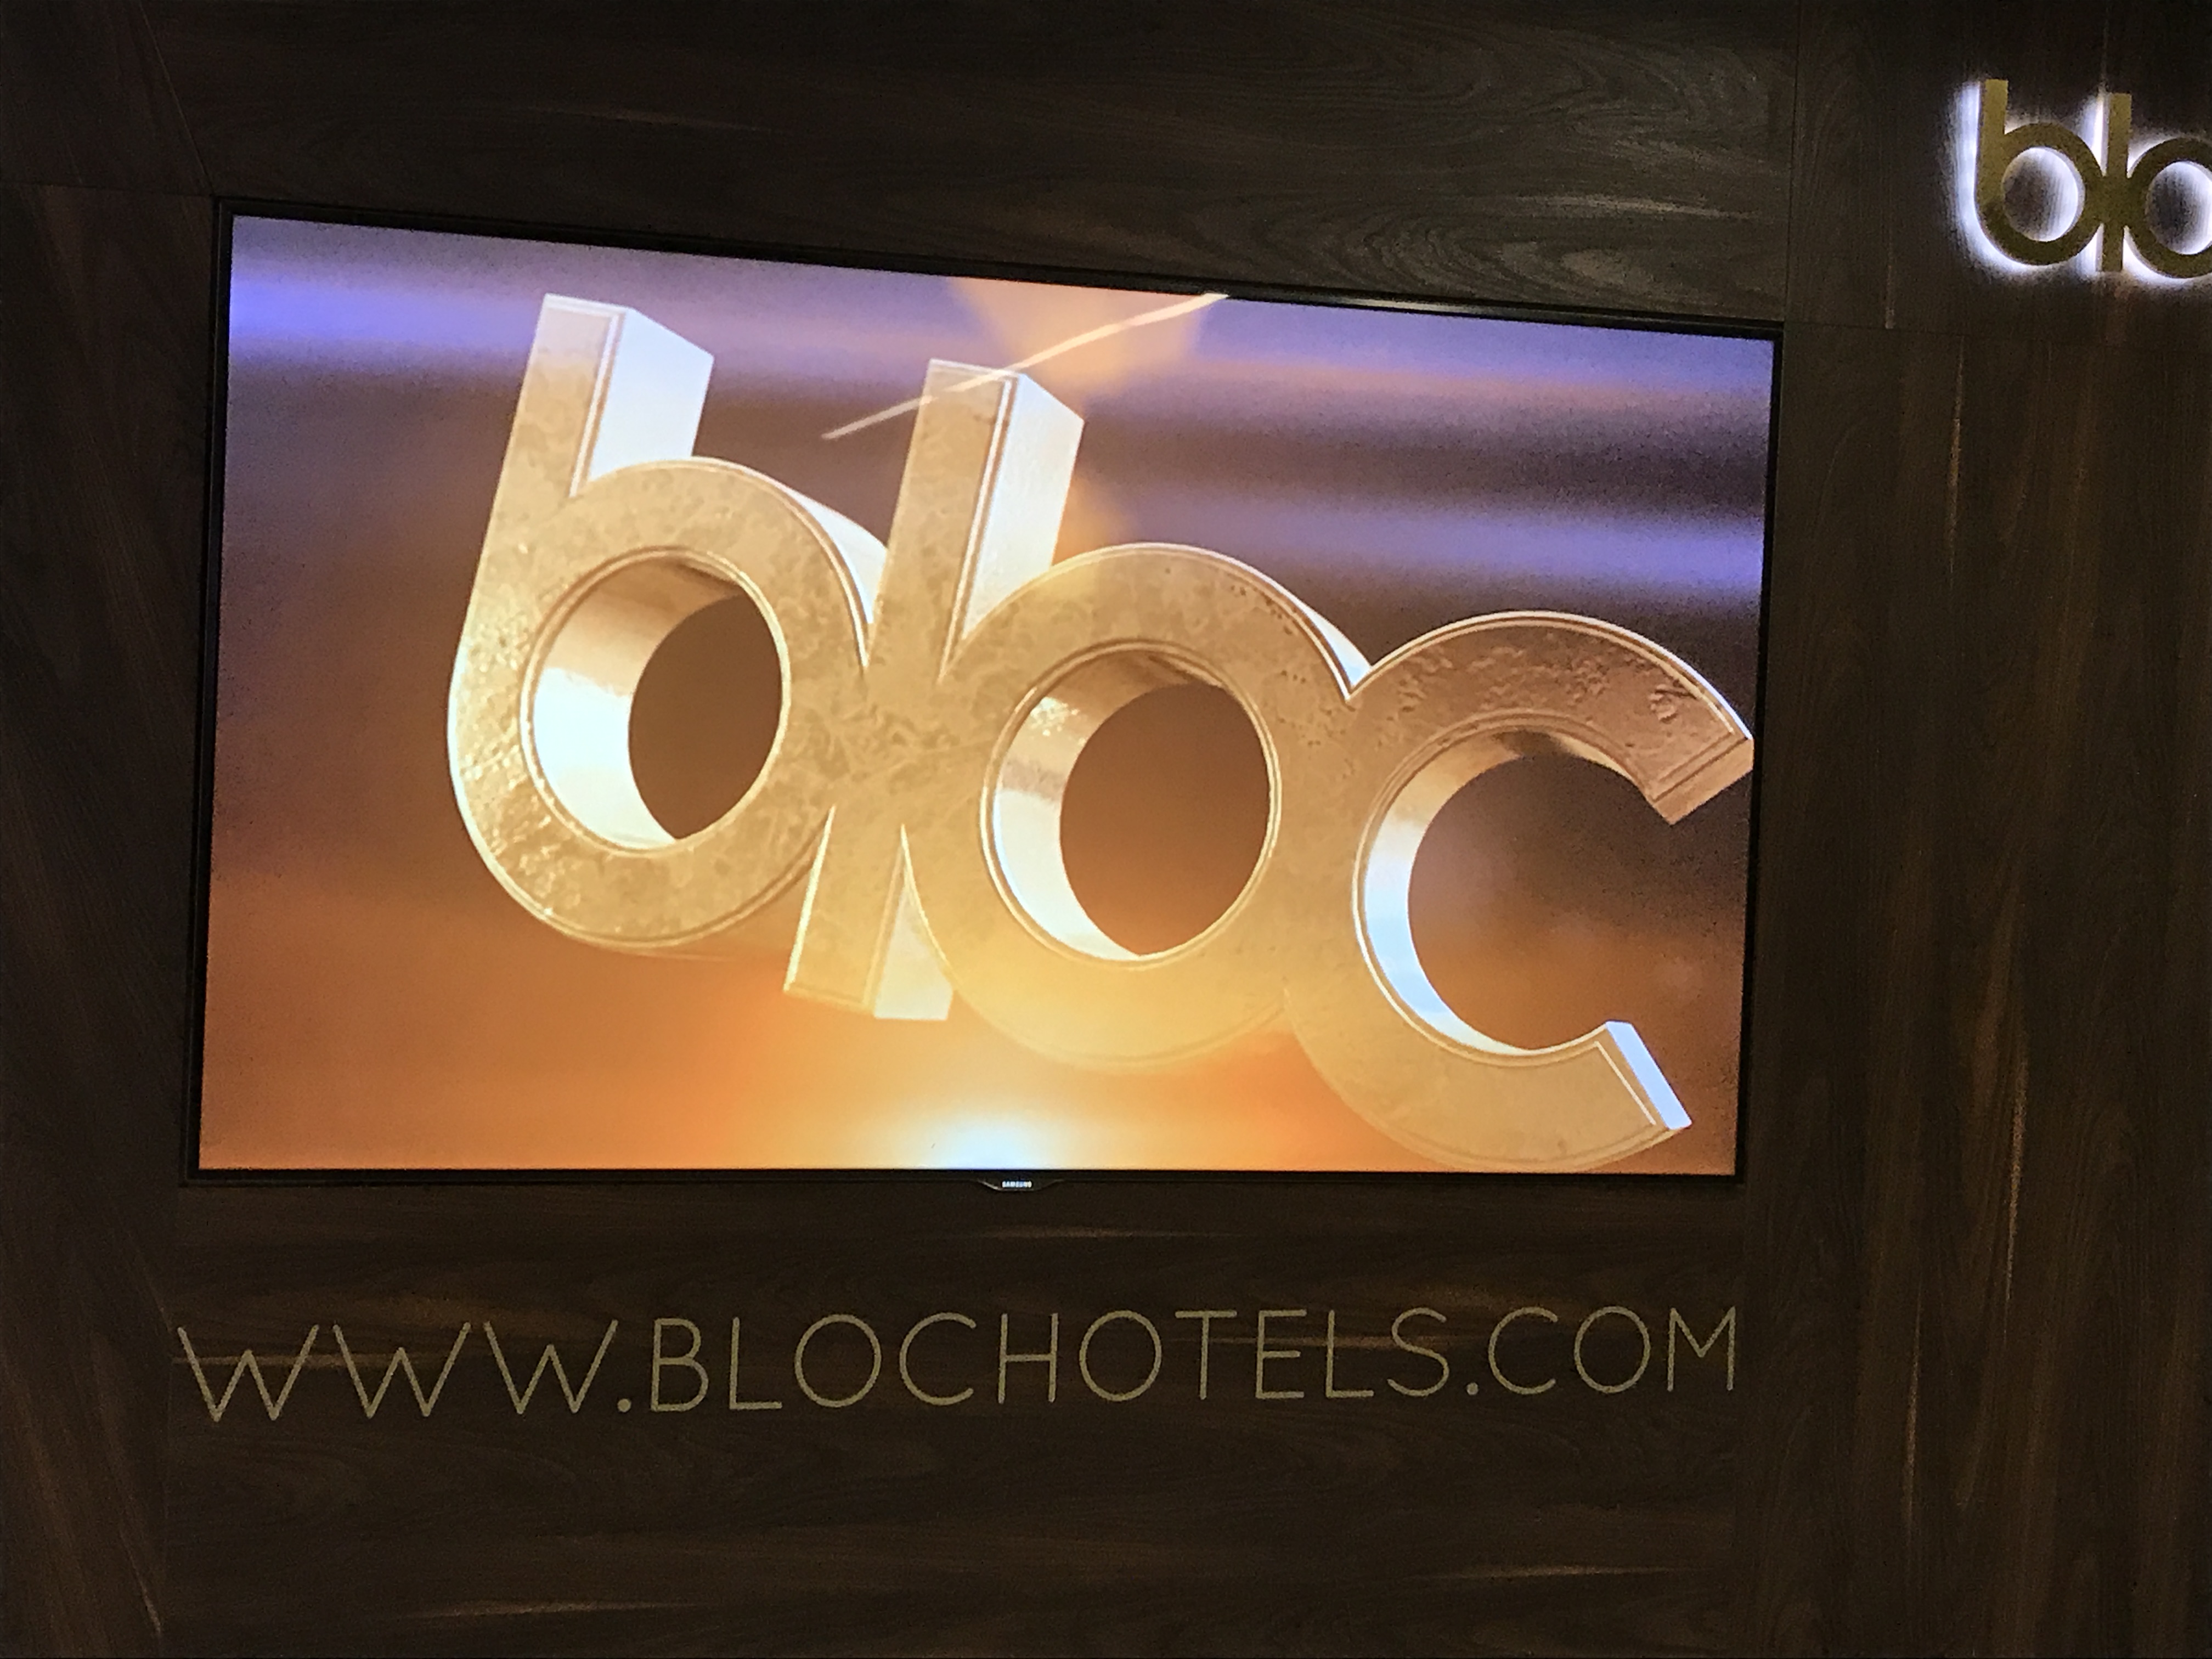 Bloc hotel Gatwick review